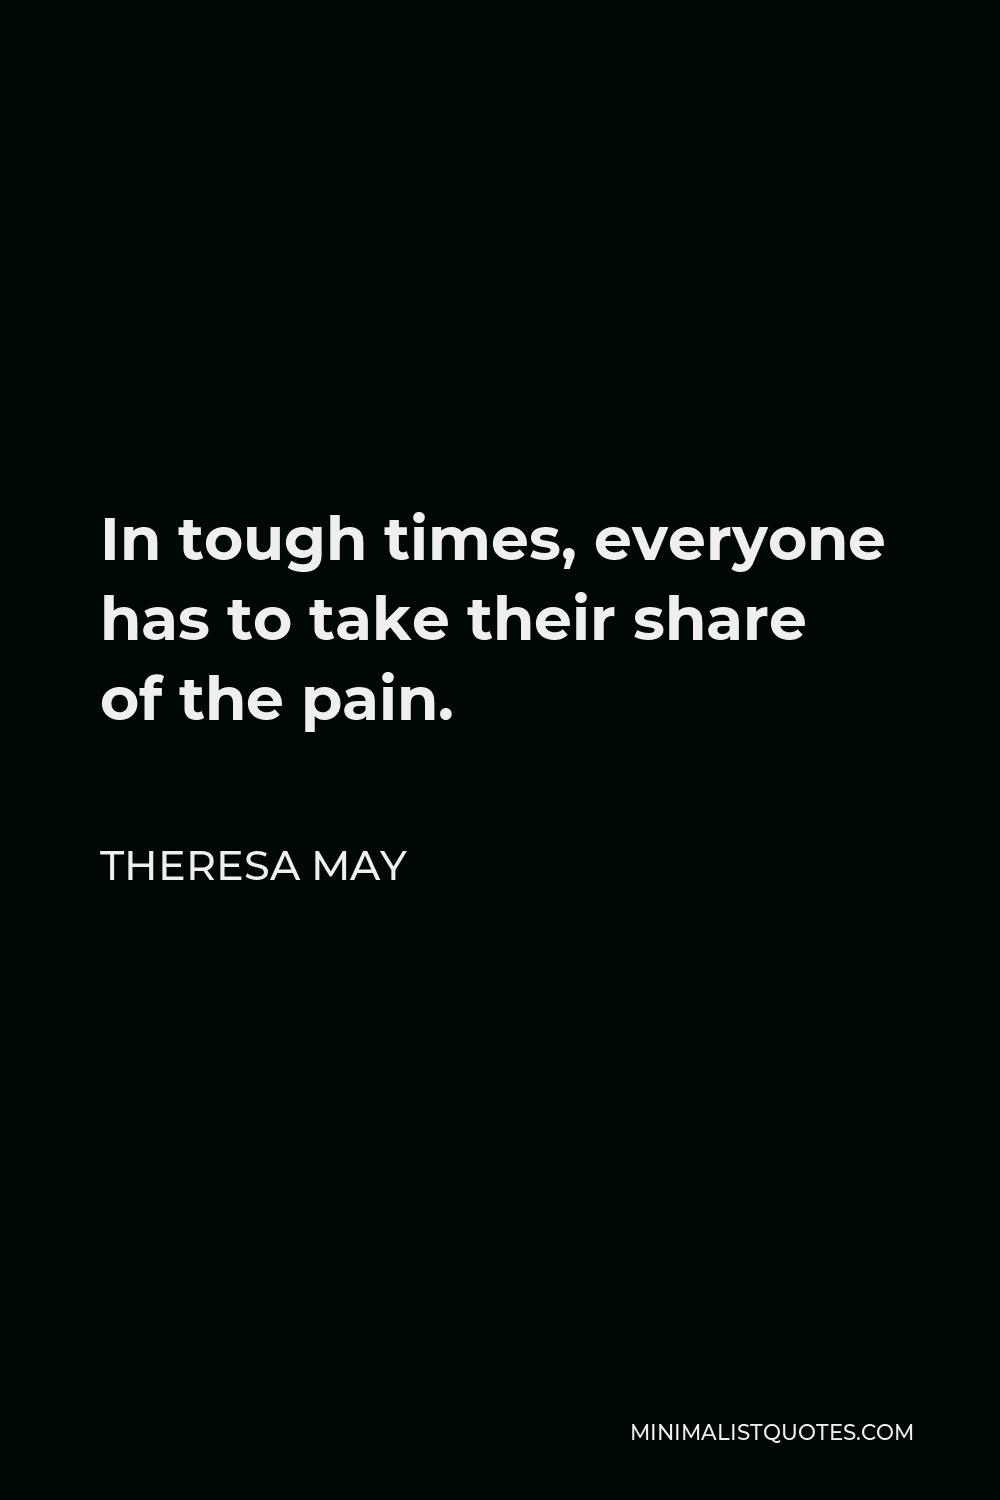 Theresa May Quote - In tough times, everyone has to take their share of the pain.